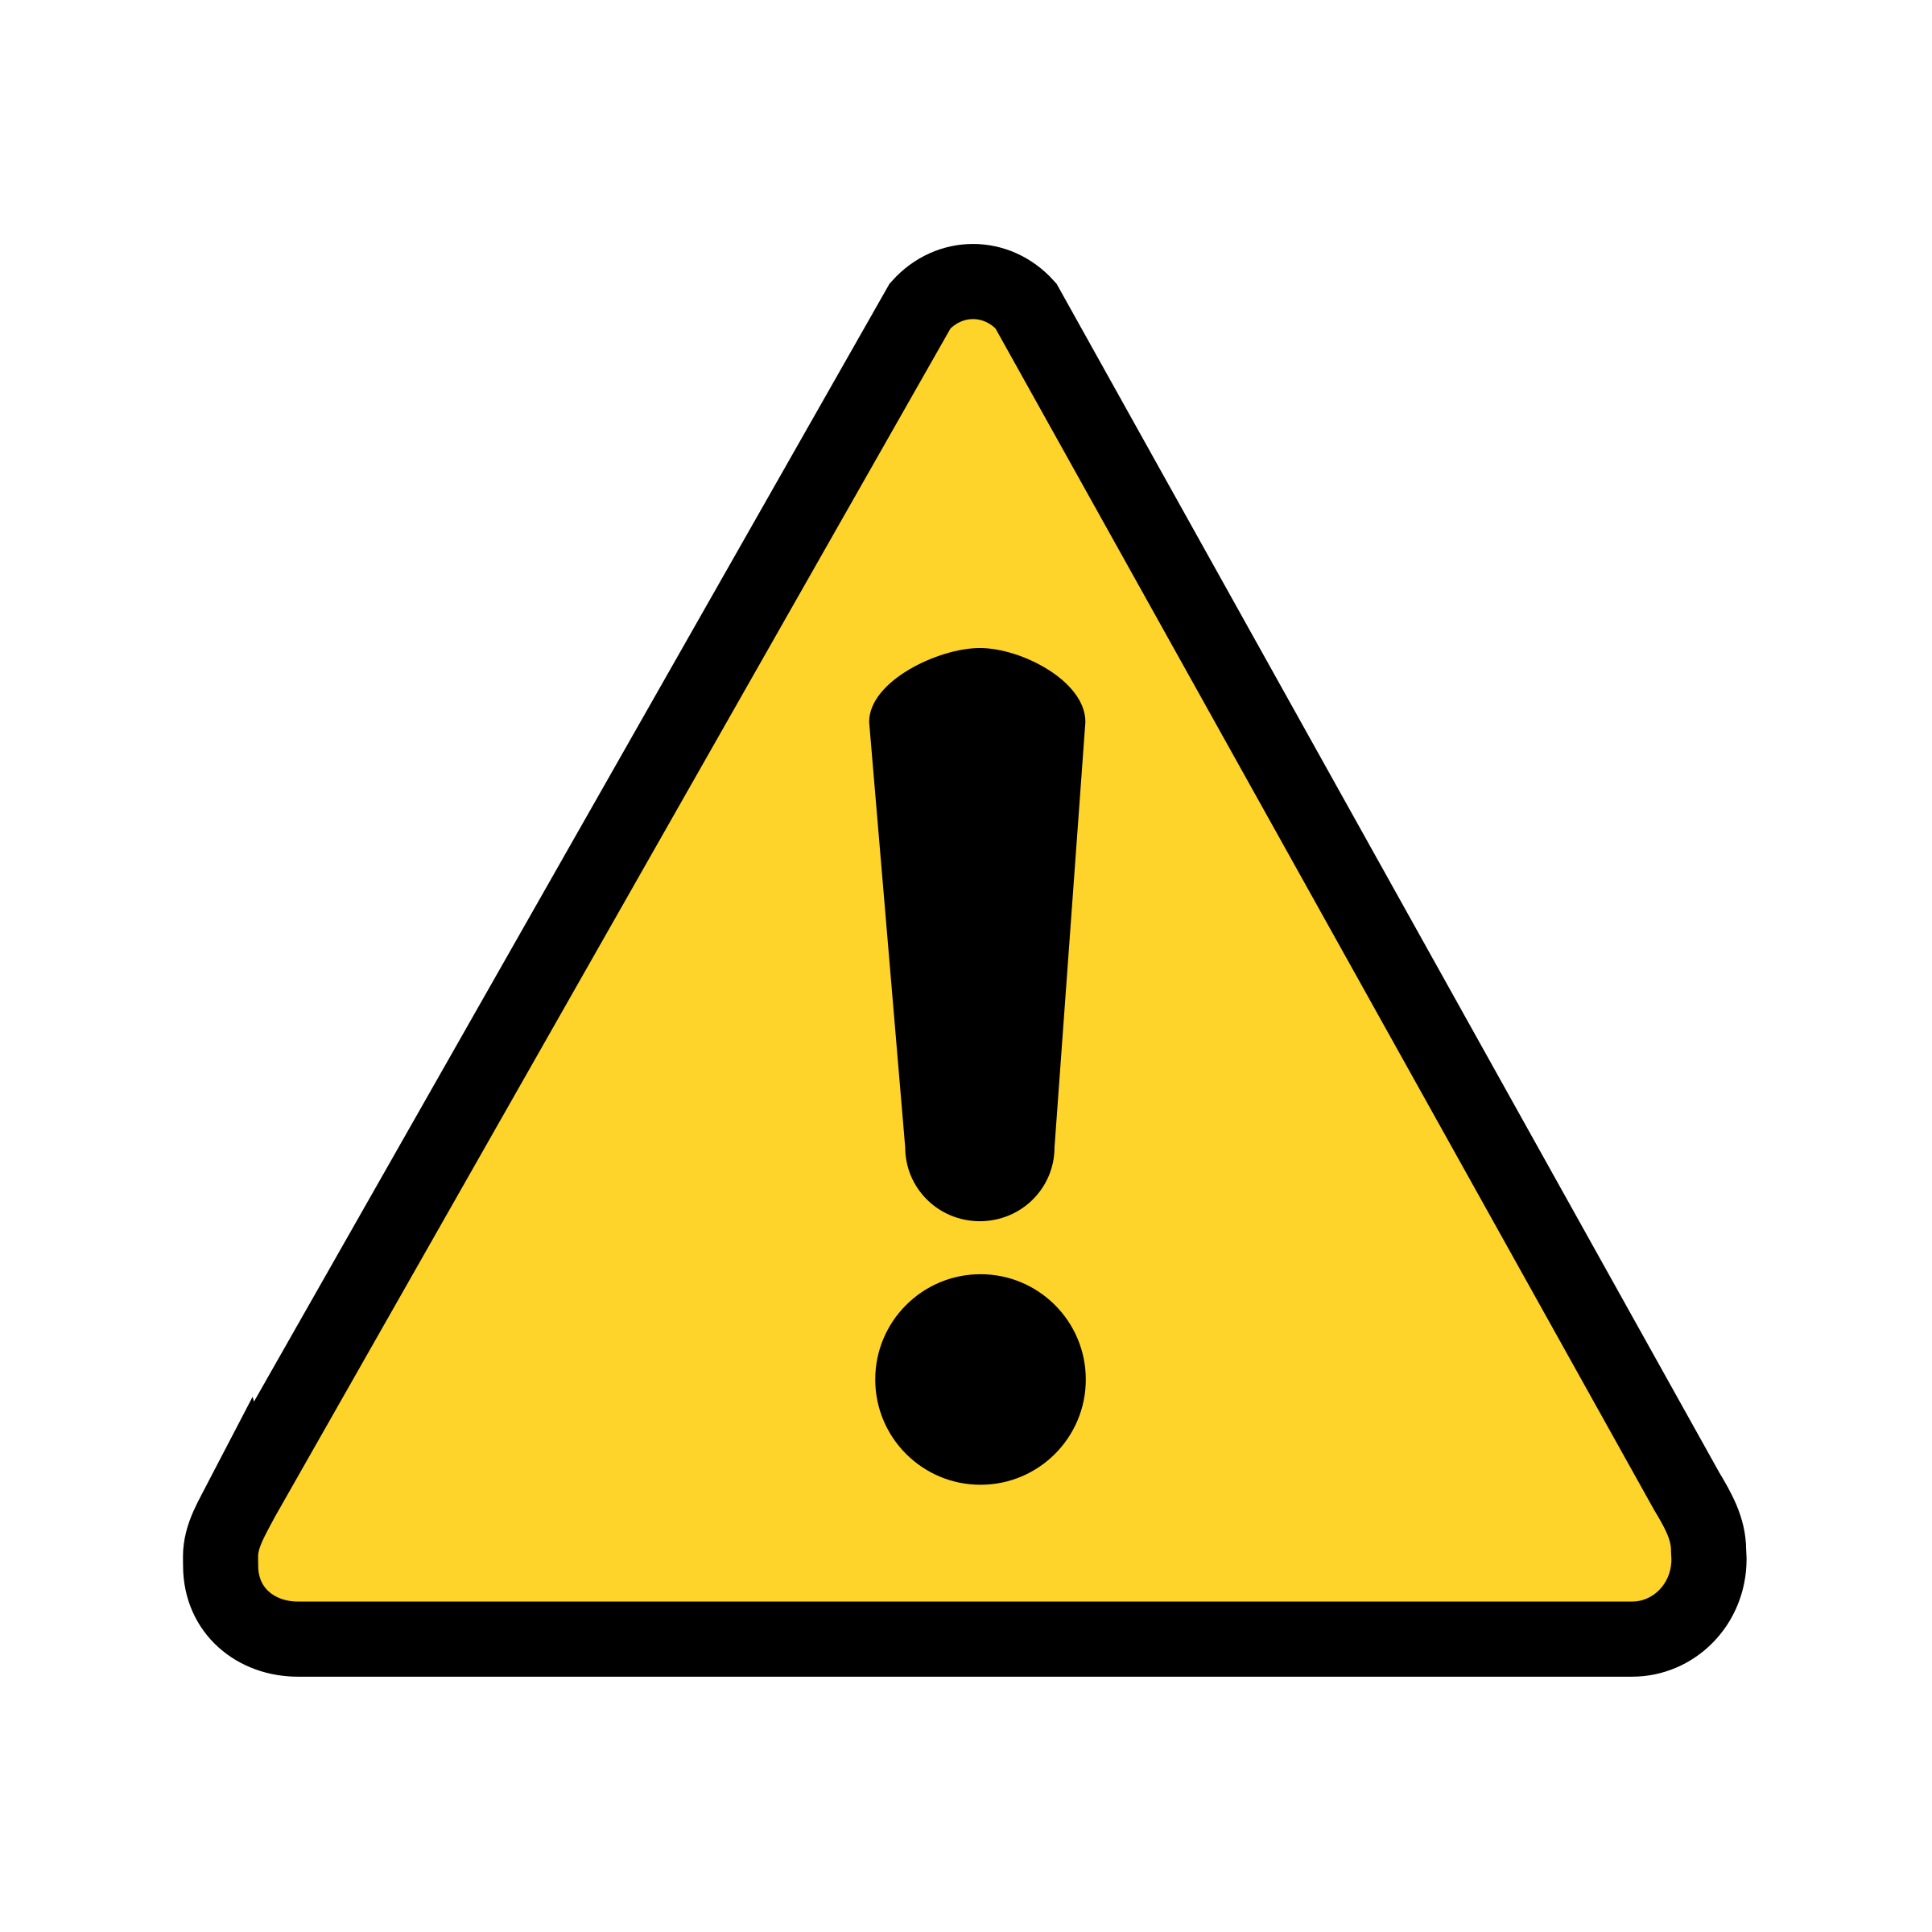 Caution PNG Free File Download